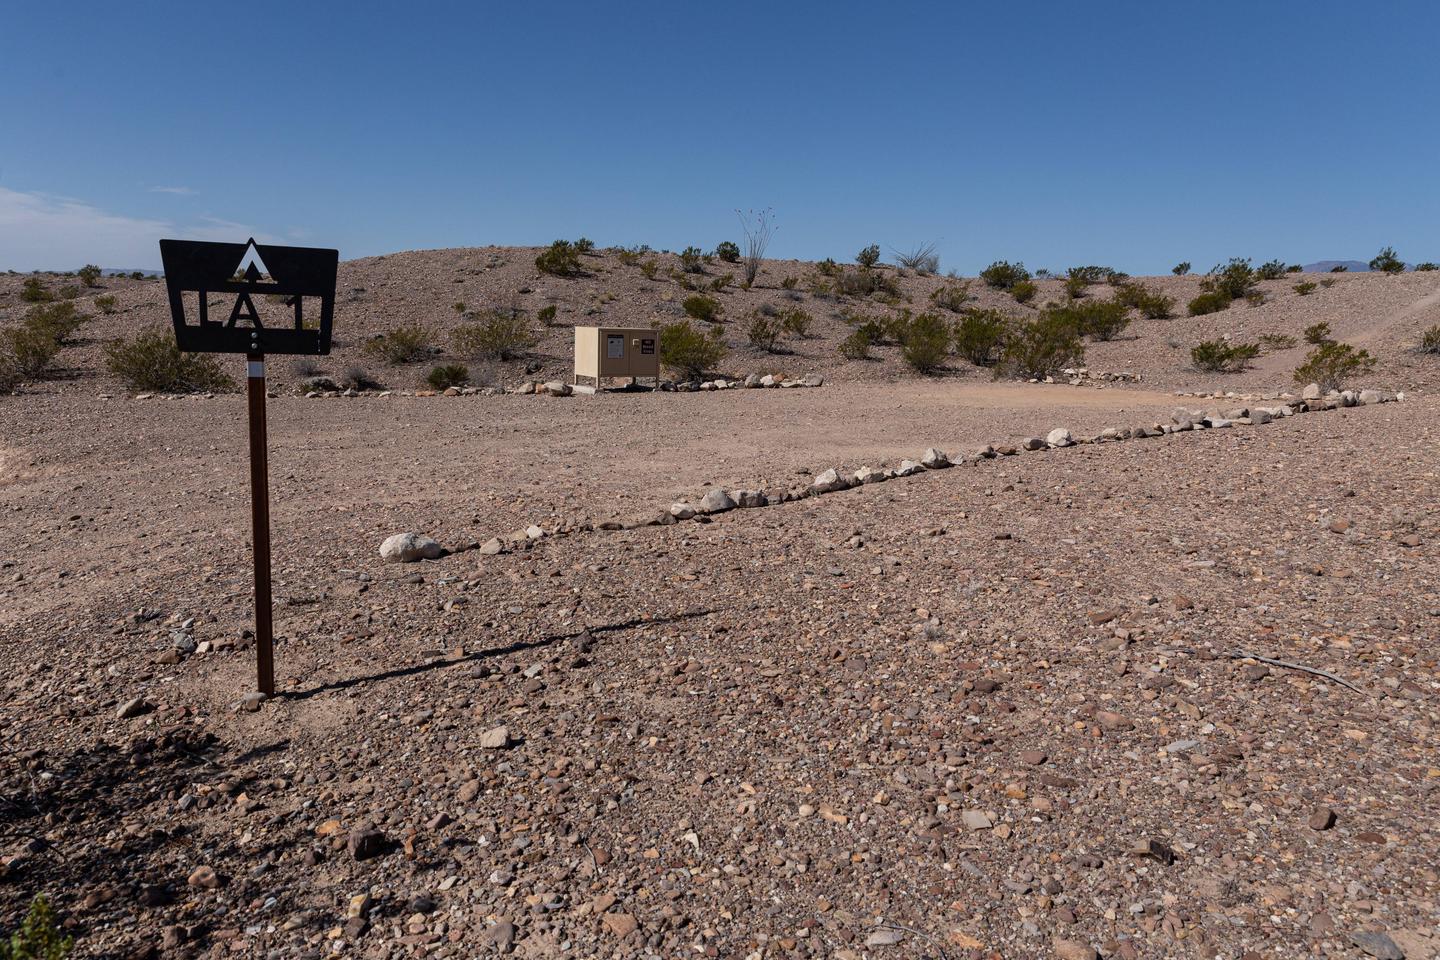 Campsite with close desert hills and bear boxCampsite marker and bear box